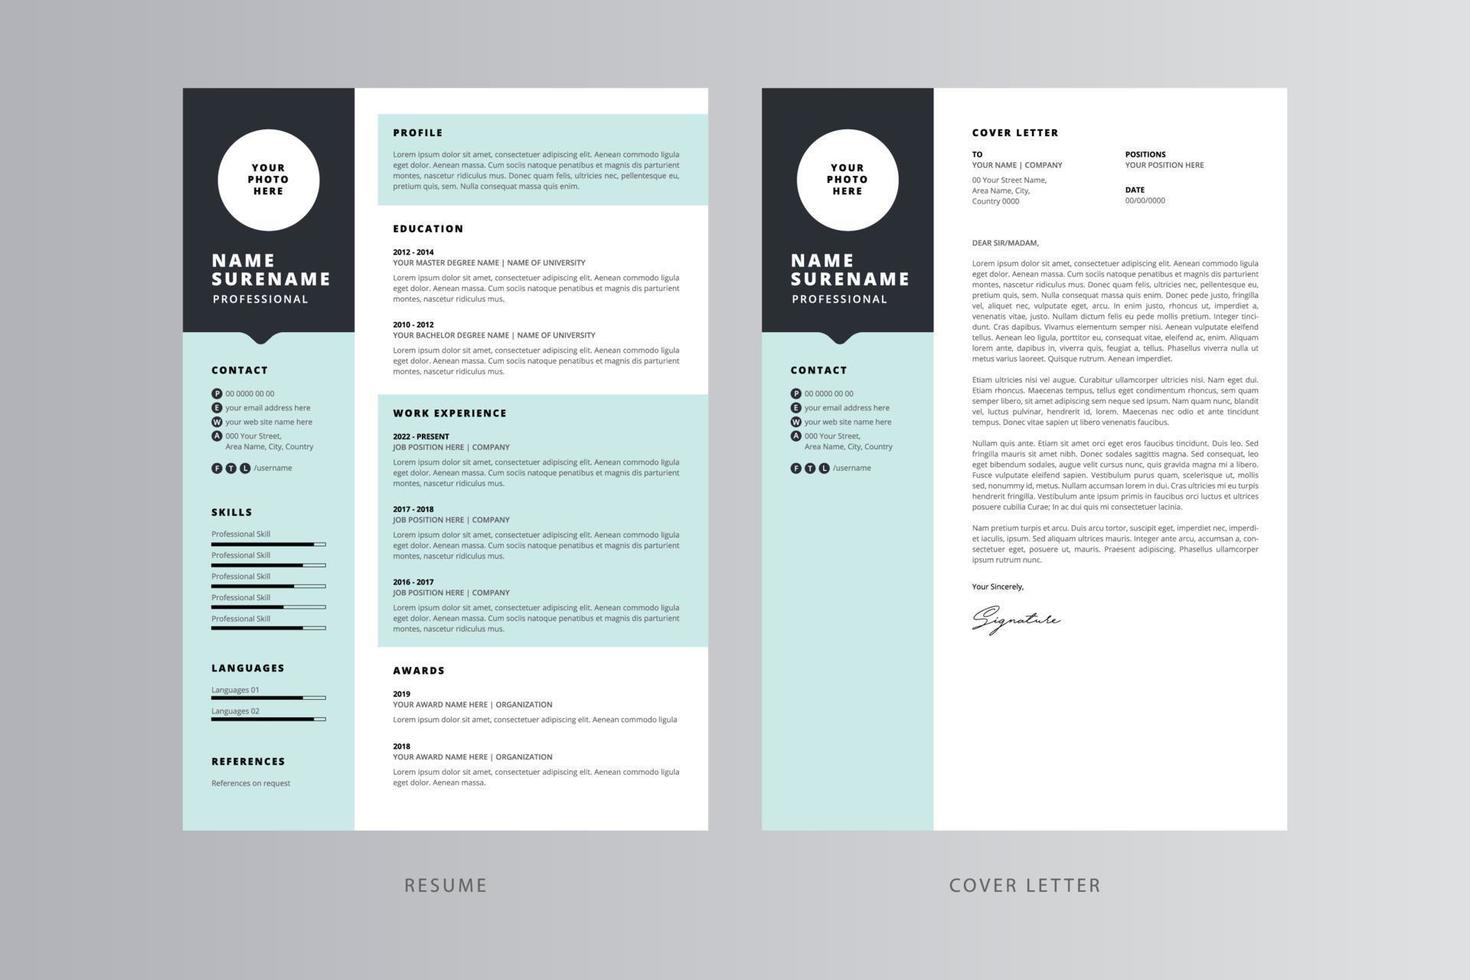 Professional Resume and Cover Letter Template Pro Vector